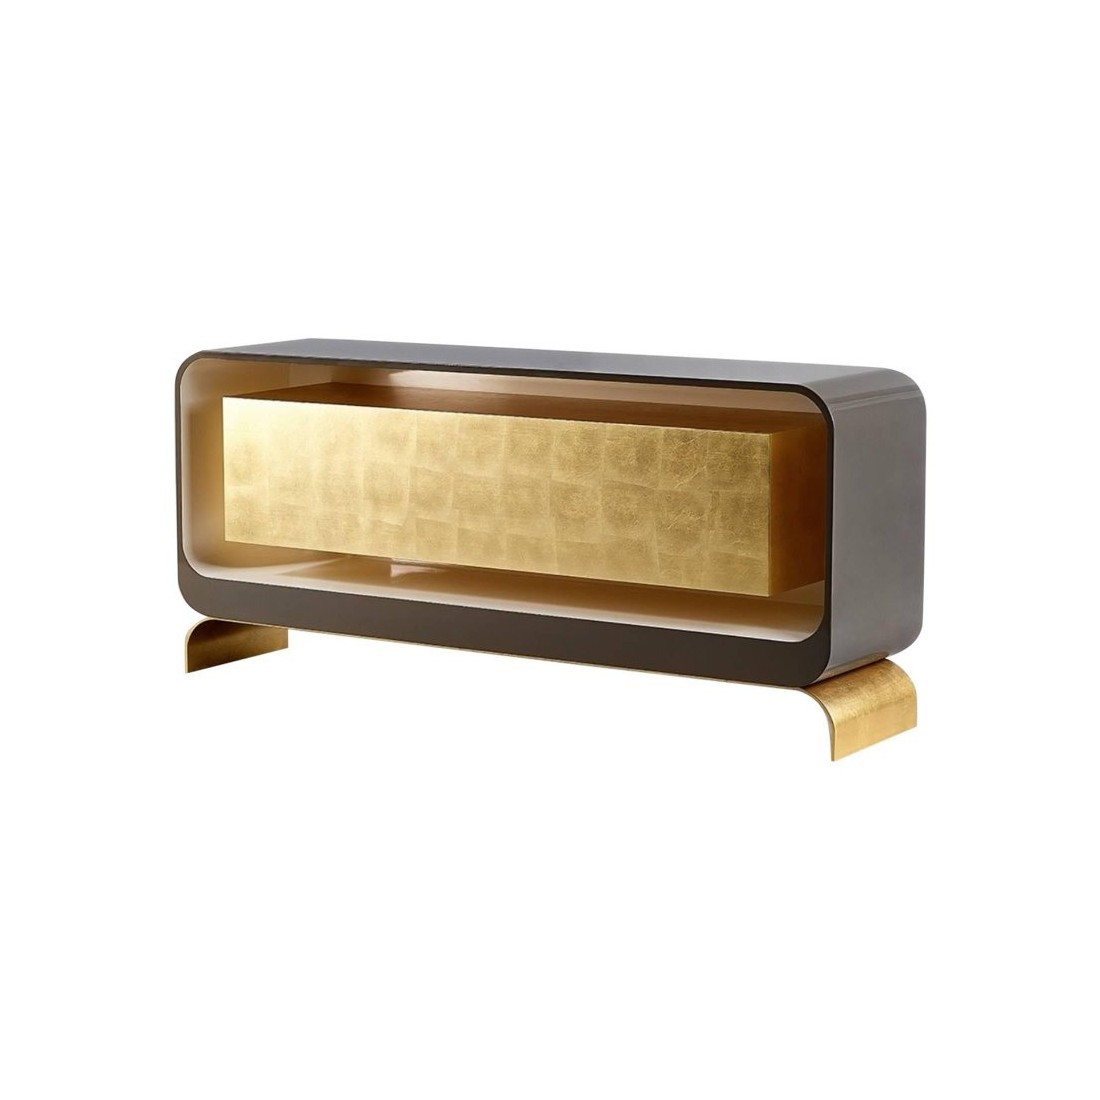 Буфет Lingot Smoke Sideboard, Contemporary Gold Leaf and Lacquer Sideboard